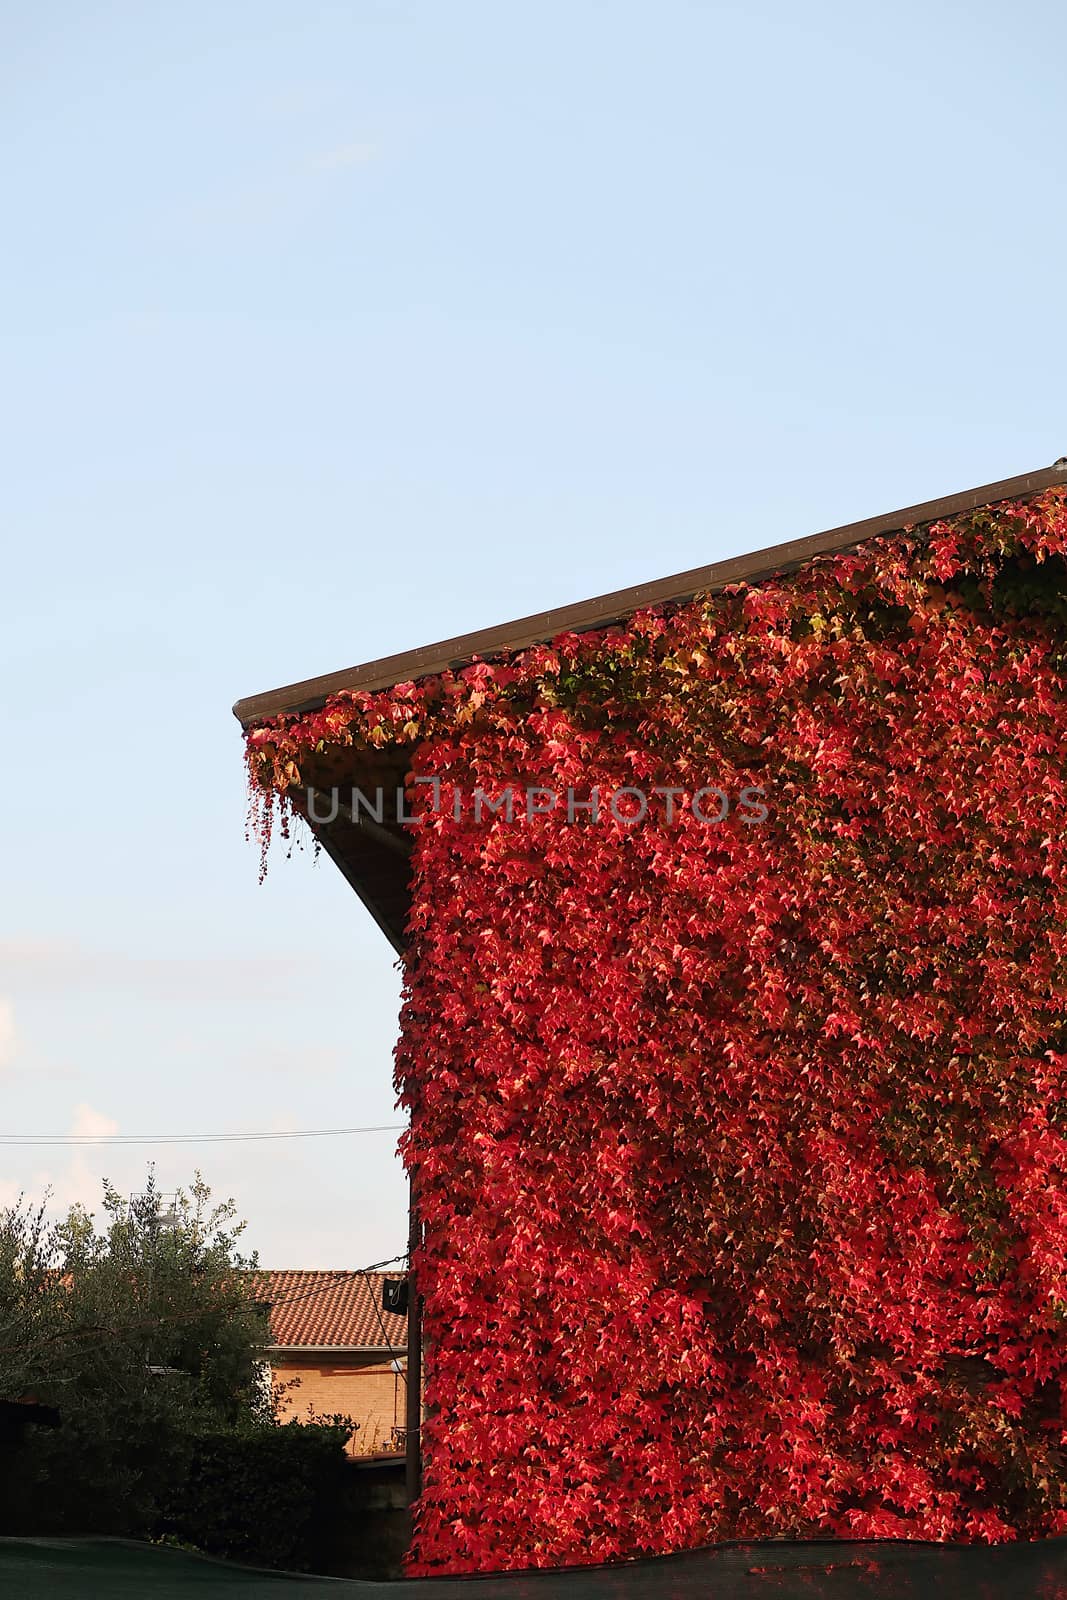 The red leaves of a Canadian vine color the facade of a house in Lombardy.